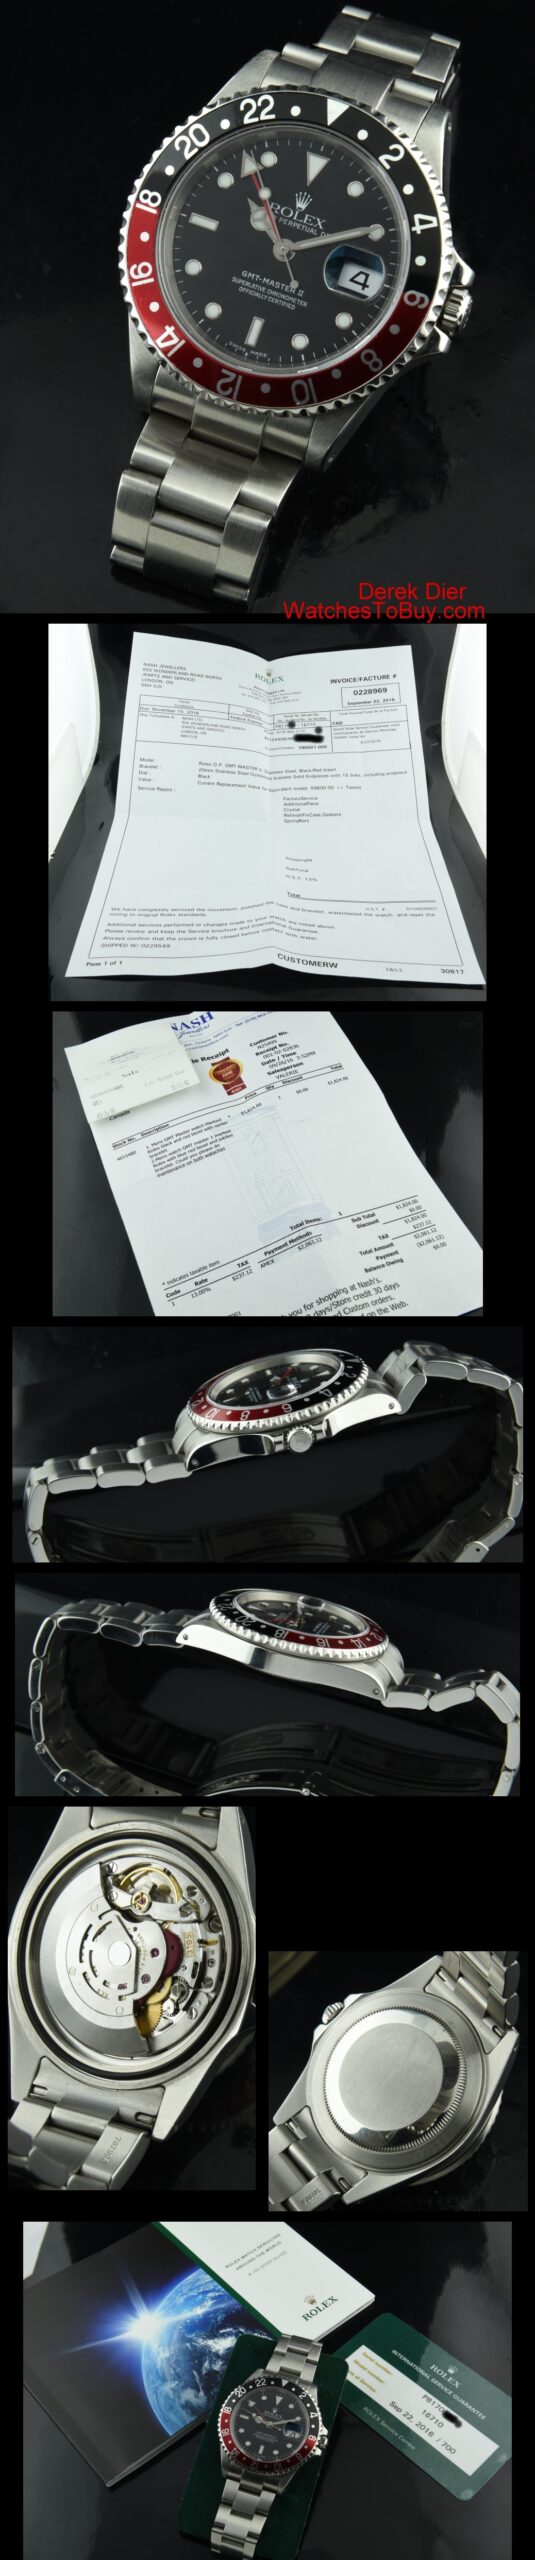 2000 Rolex GMT Master stainless steel watch with original Oyster bracelet, case, Coke bezel, dial, hands, and green velvet service pouch.